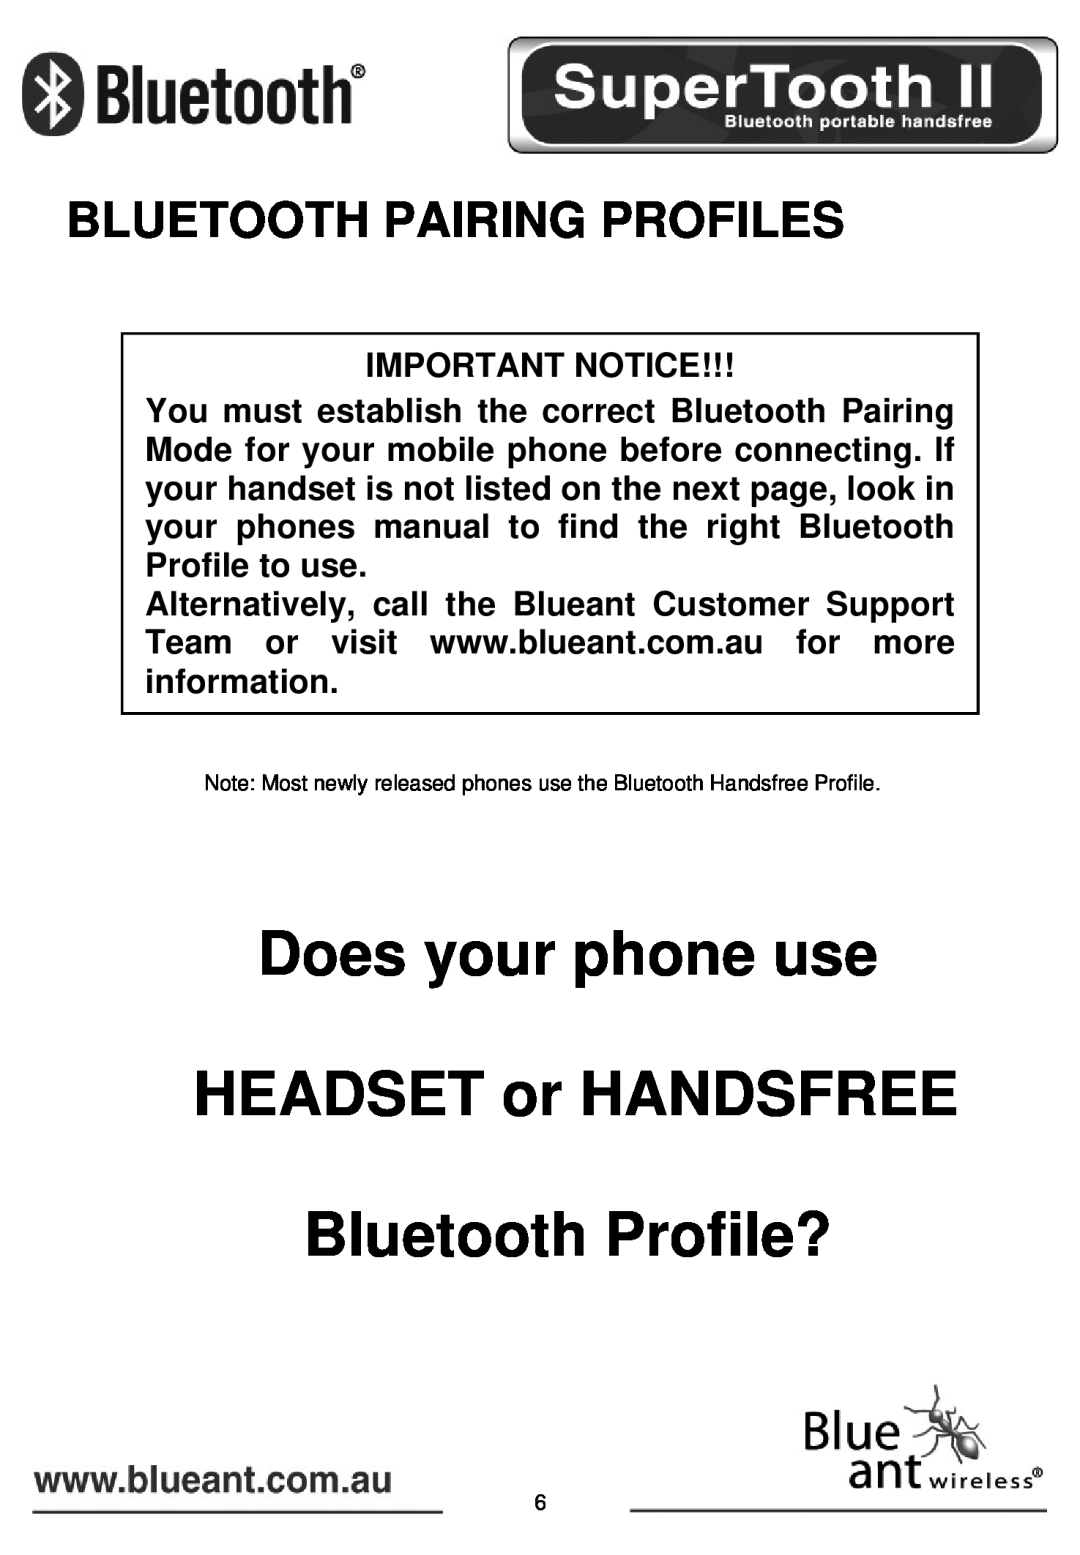 BlueAnt Wireless SUPERTOOTH II Bluetooth Pairing Profiles, Does your phone use HEADSET or HANDSFREE, Bluetooth Profile? 